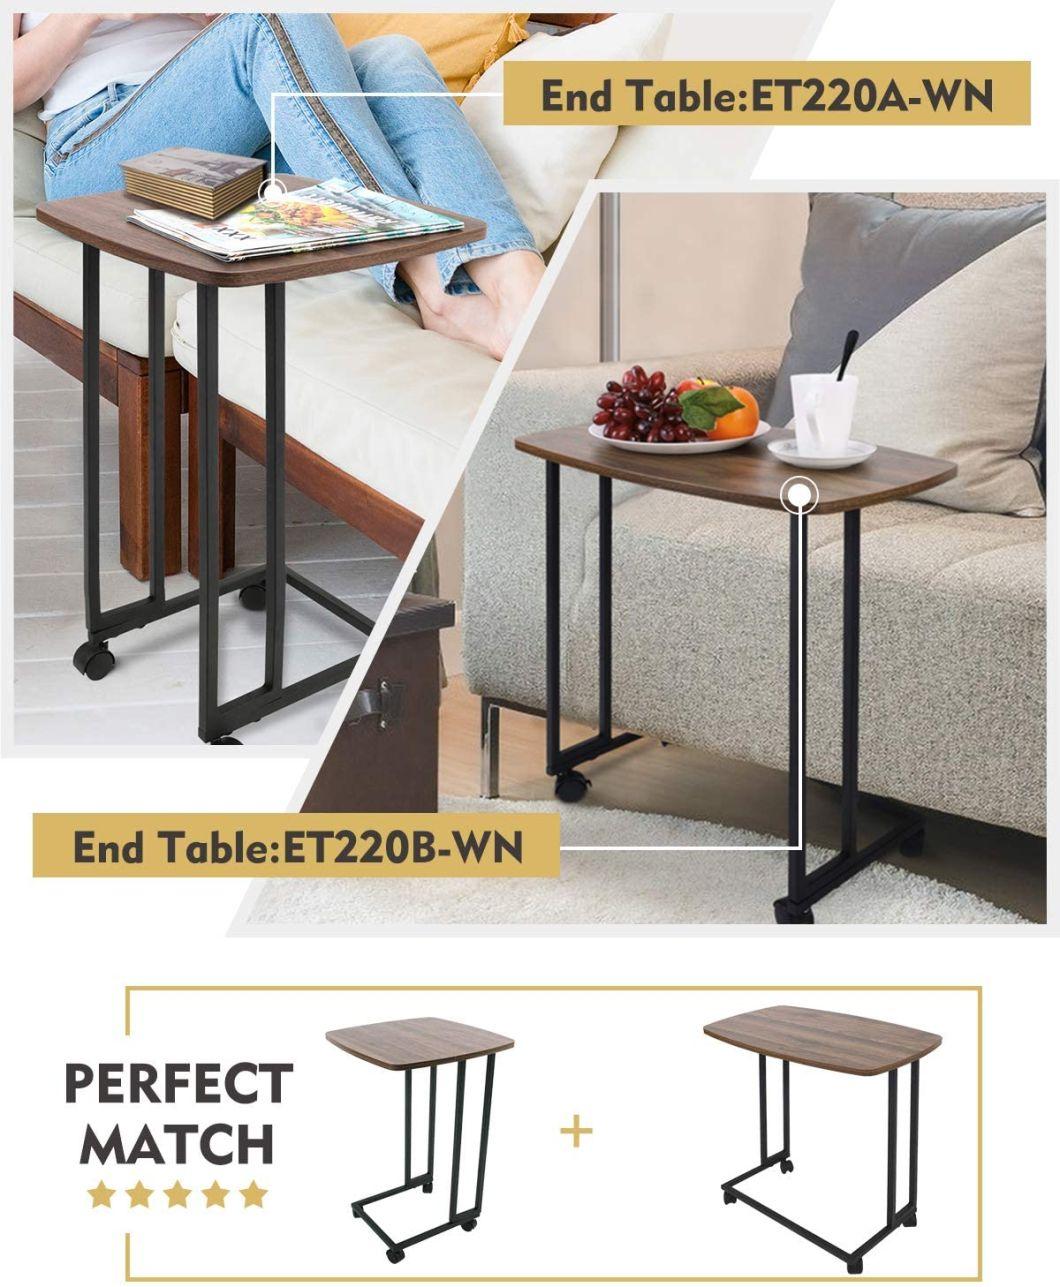 Modern Side Table, Moncot Mobile C Shaped End Table with Detachable Casters, Bed Room Laptop Bed Tray Table Portable